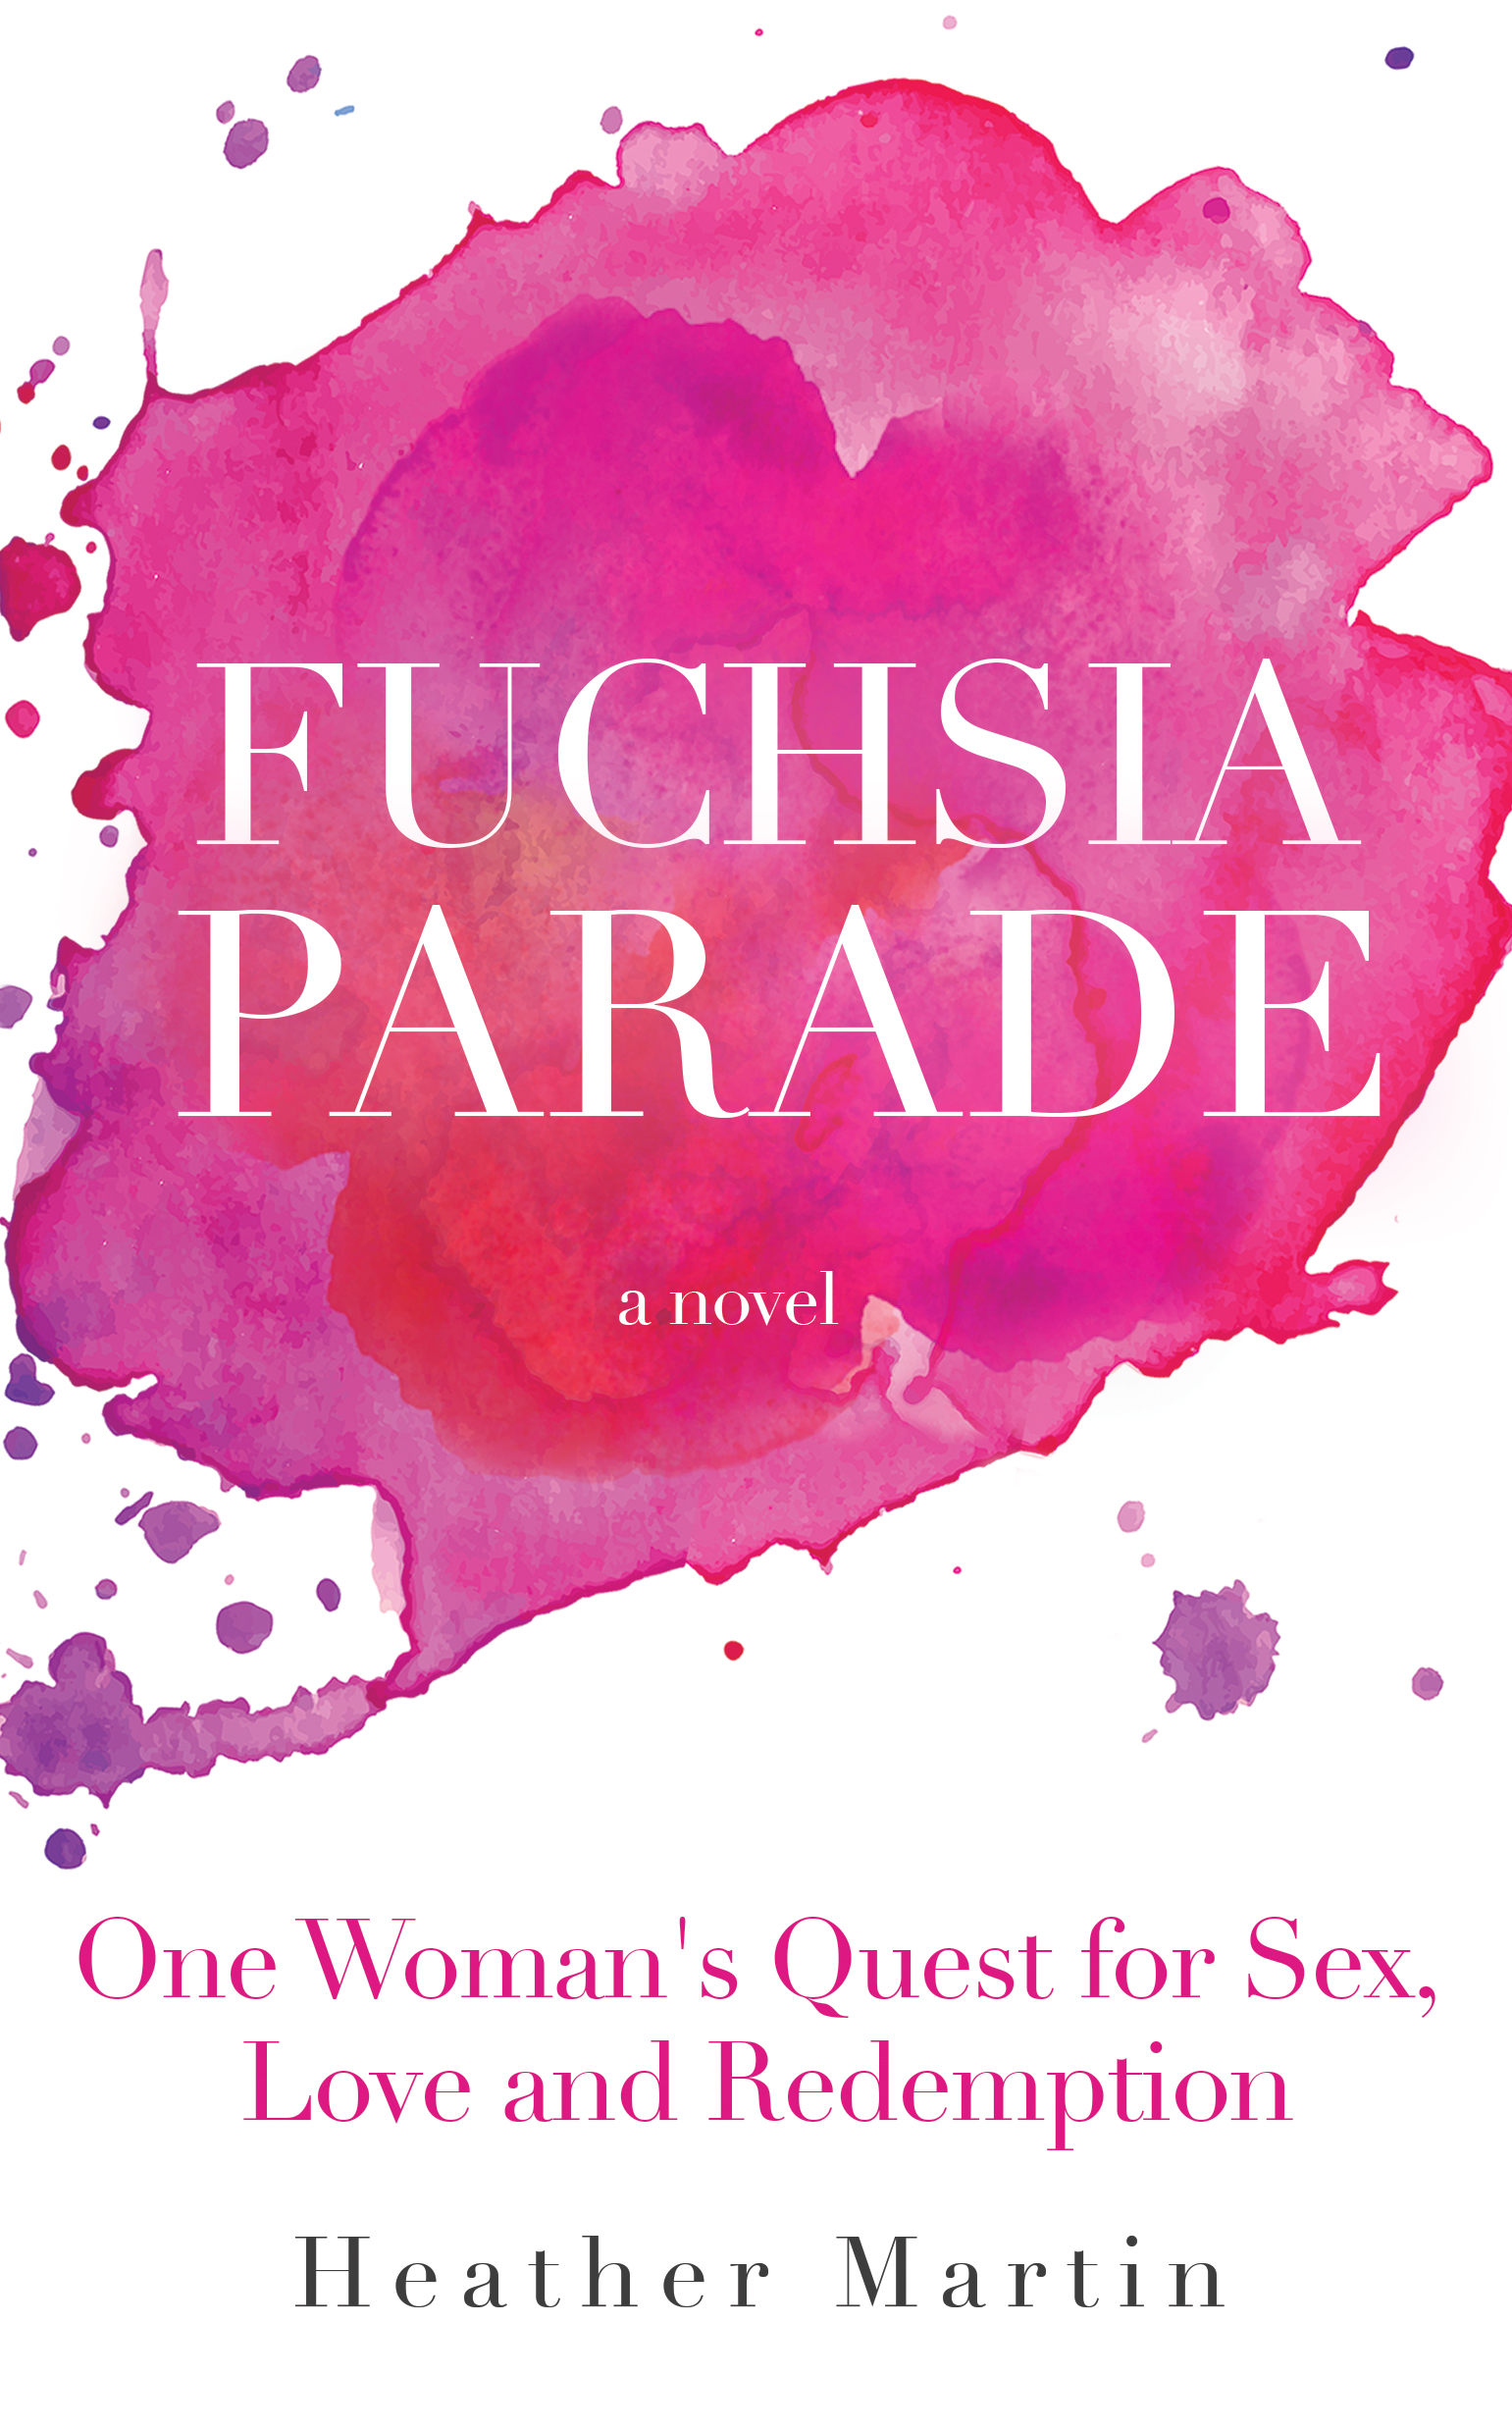 Fuchsia Parade: One Woman’s Quest for Sex, Love and Redemption is a relevant, raw and fascinating story of one woman’s search to reclaim herself after childhood sex abuse.